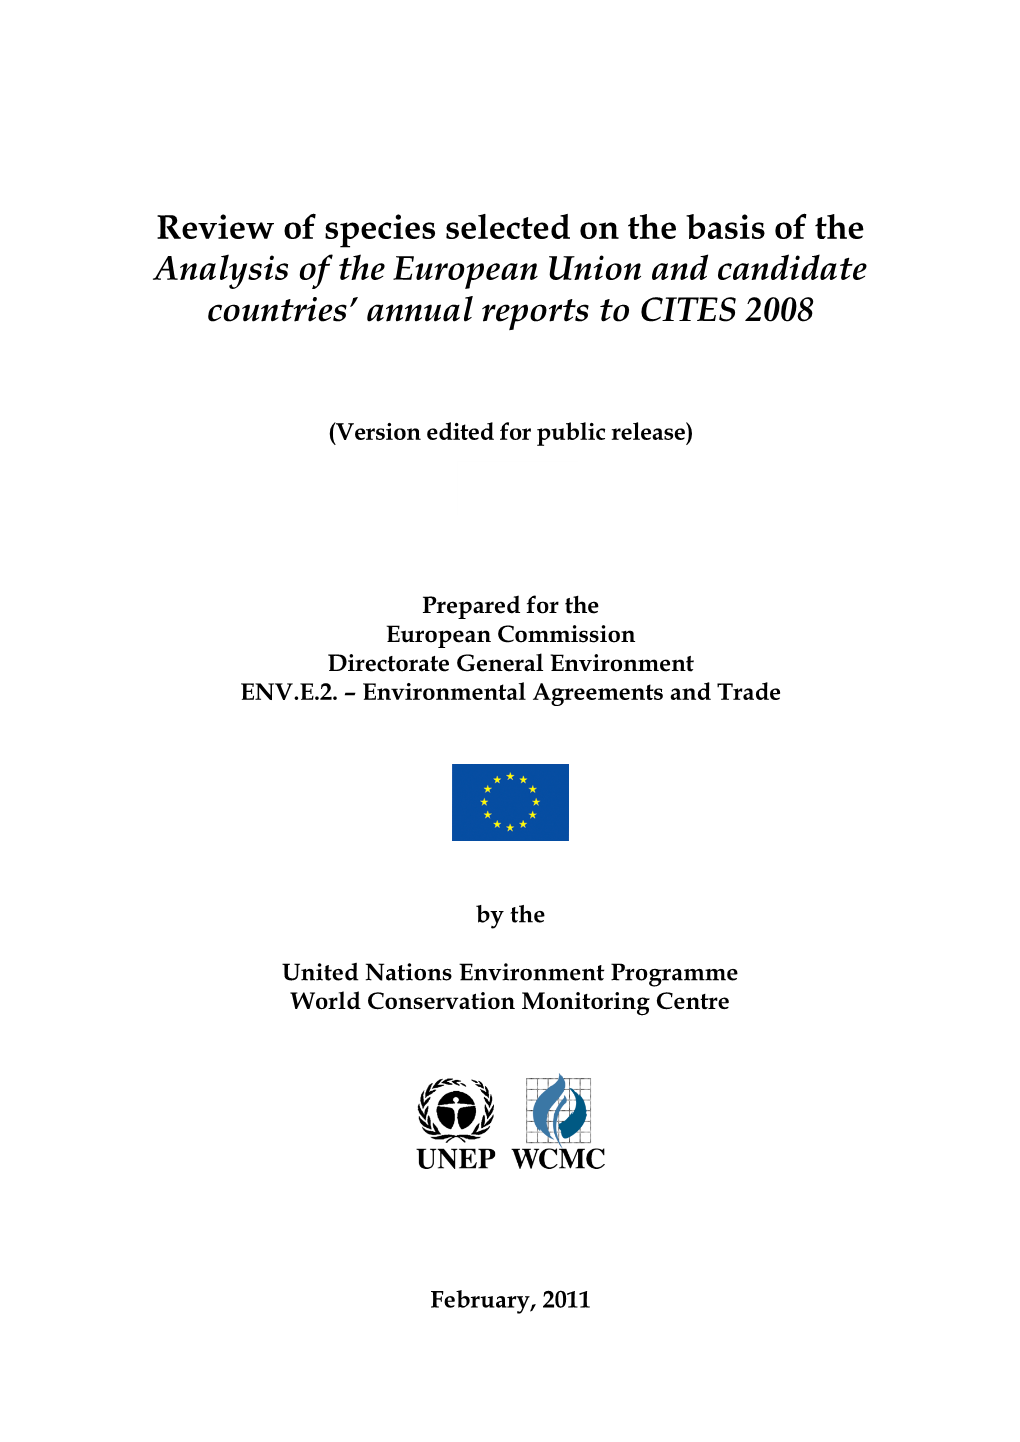 Review of Species Selected on the Basis of the Analysis of the European Union and Candidate Countries’ Annual Reports to CITES 2008